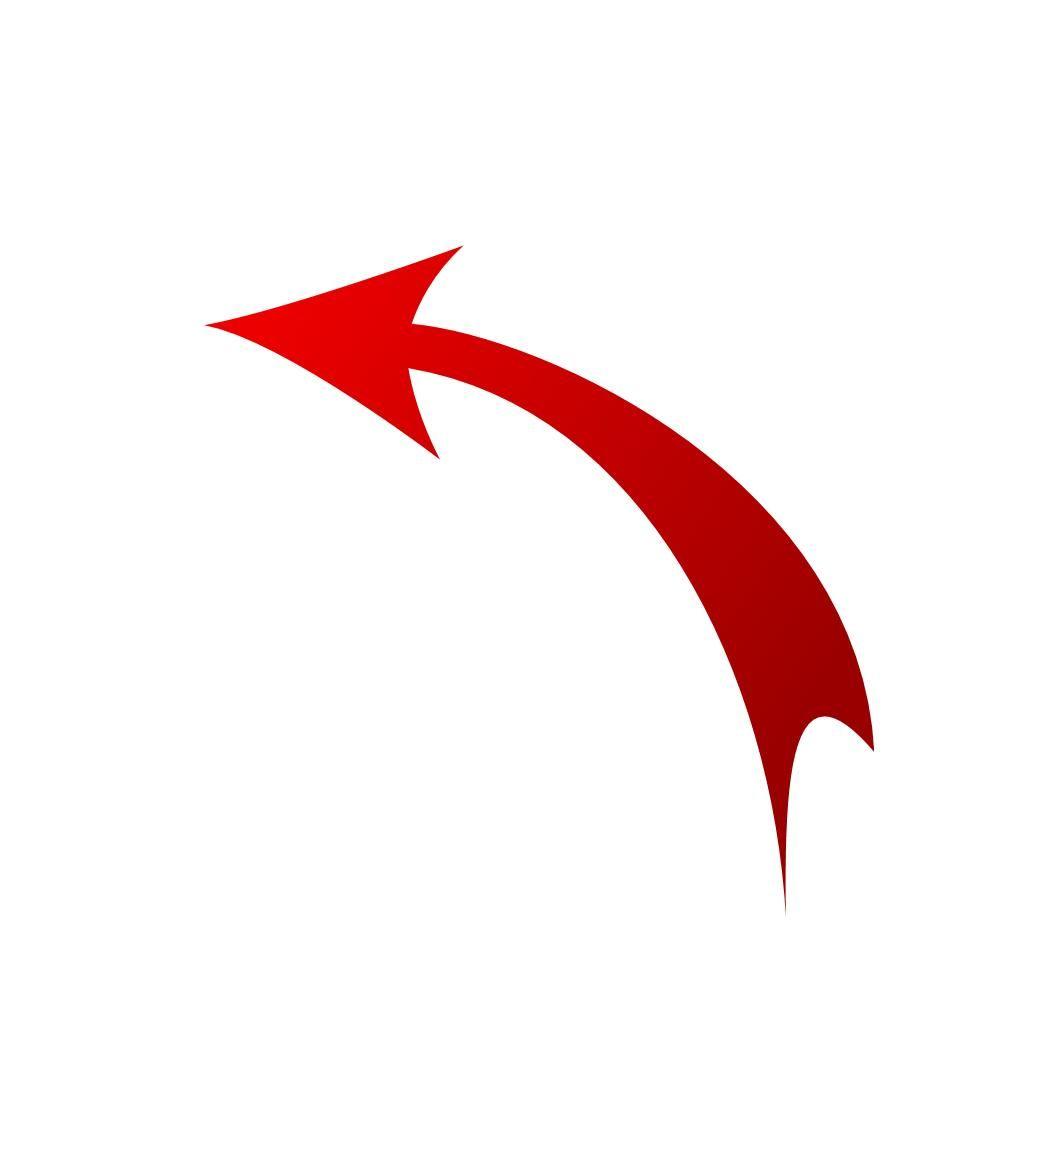 Red Arrow Logo - Free Red Arrow Image, Download Free Clip Art, Free Clip Art